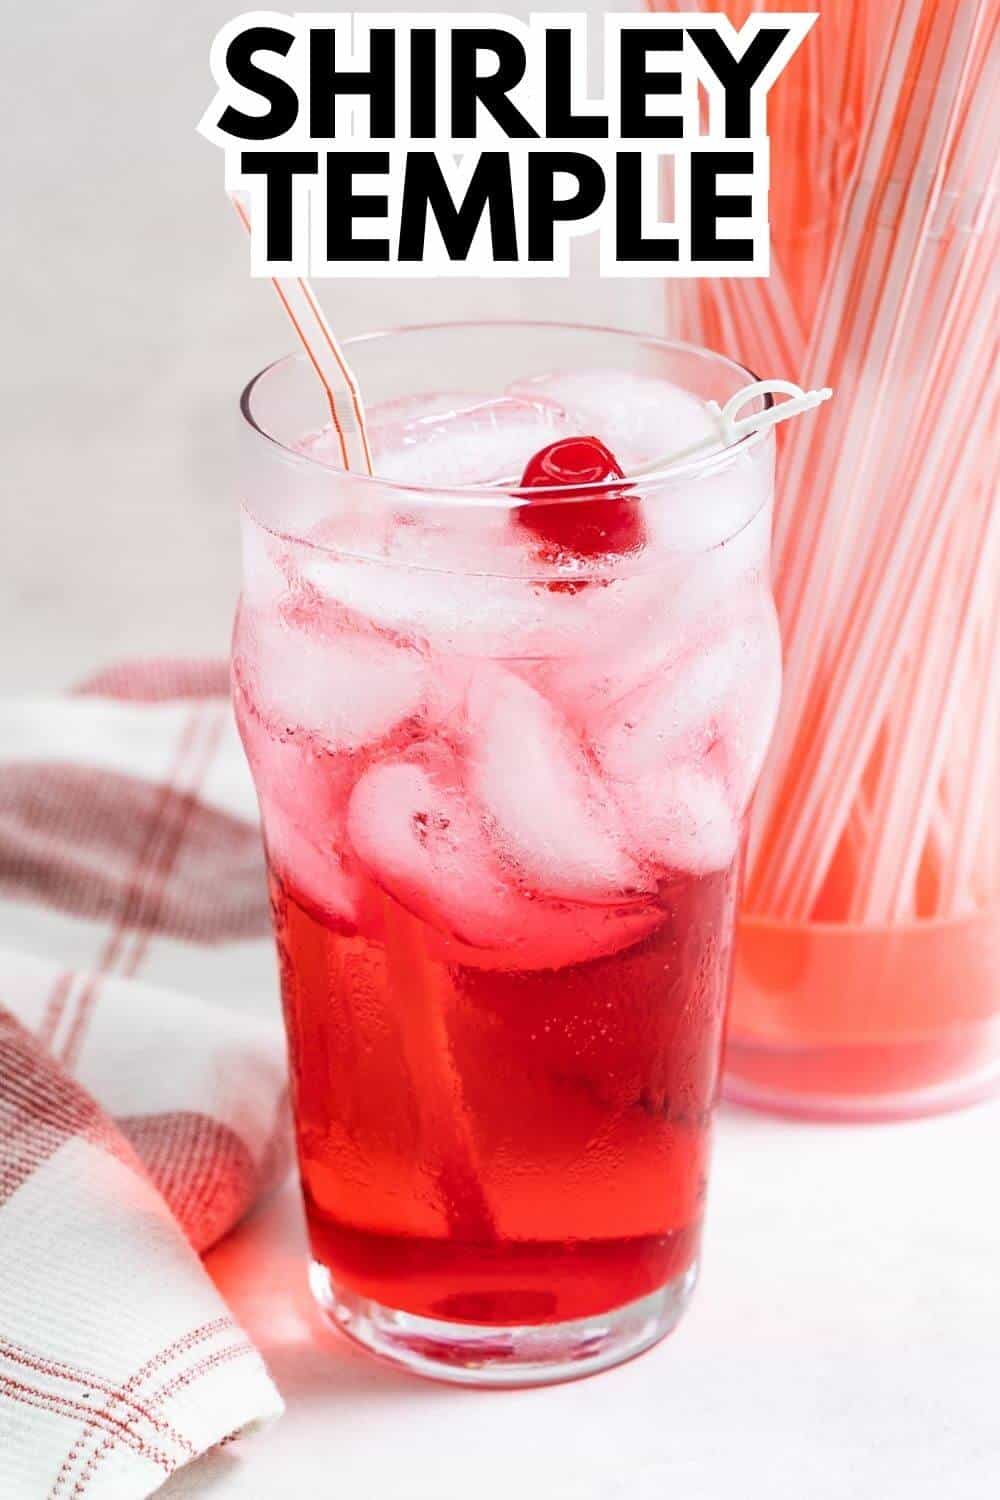 Shirley Temple drink with recipe title text overlay.